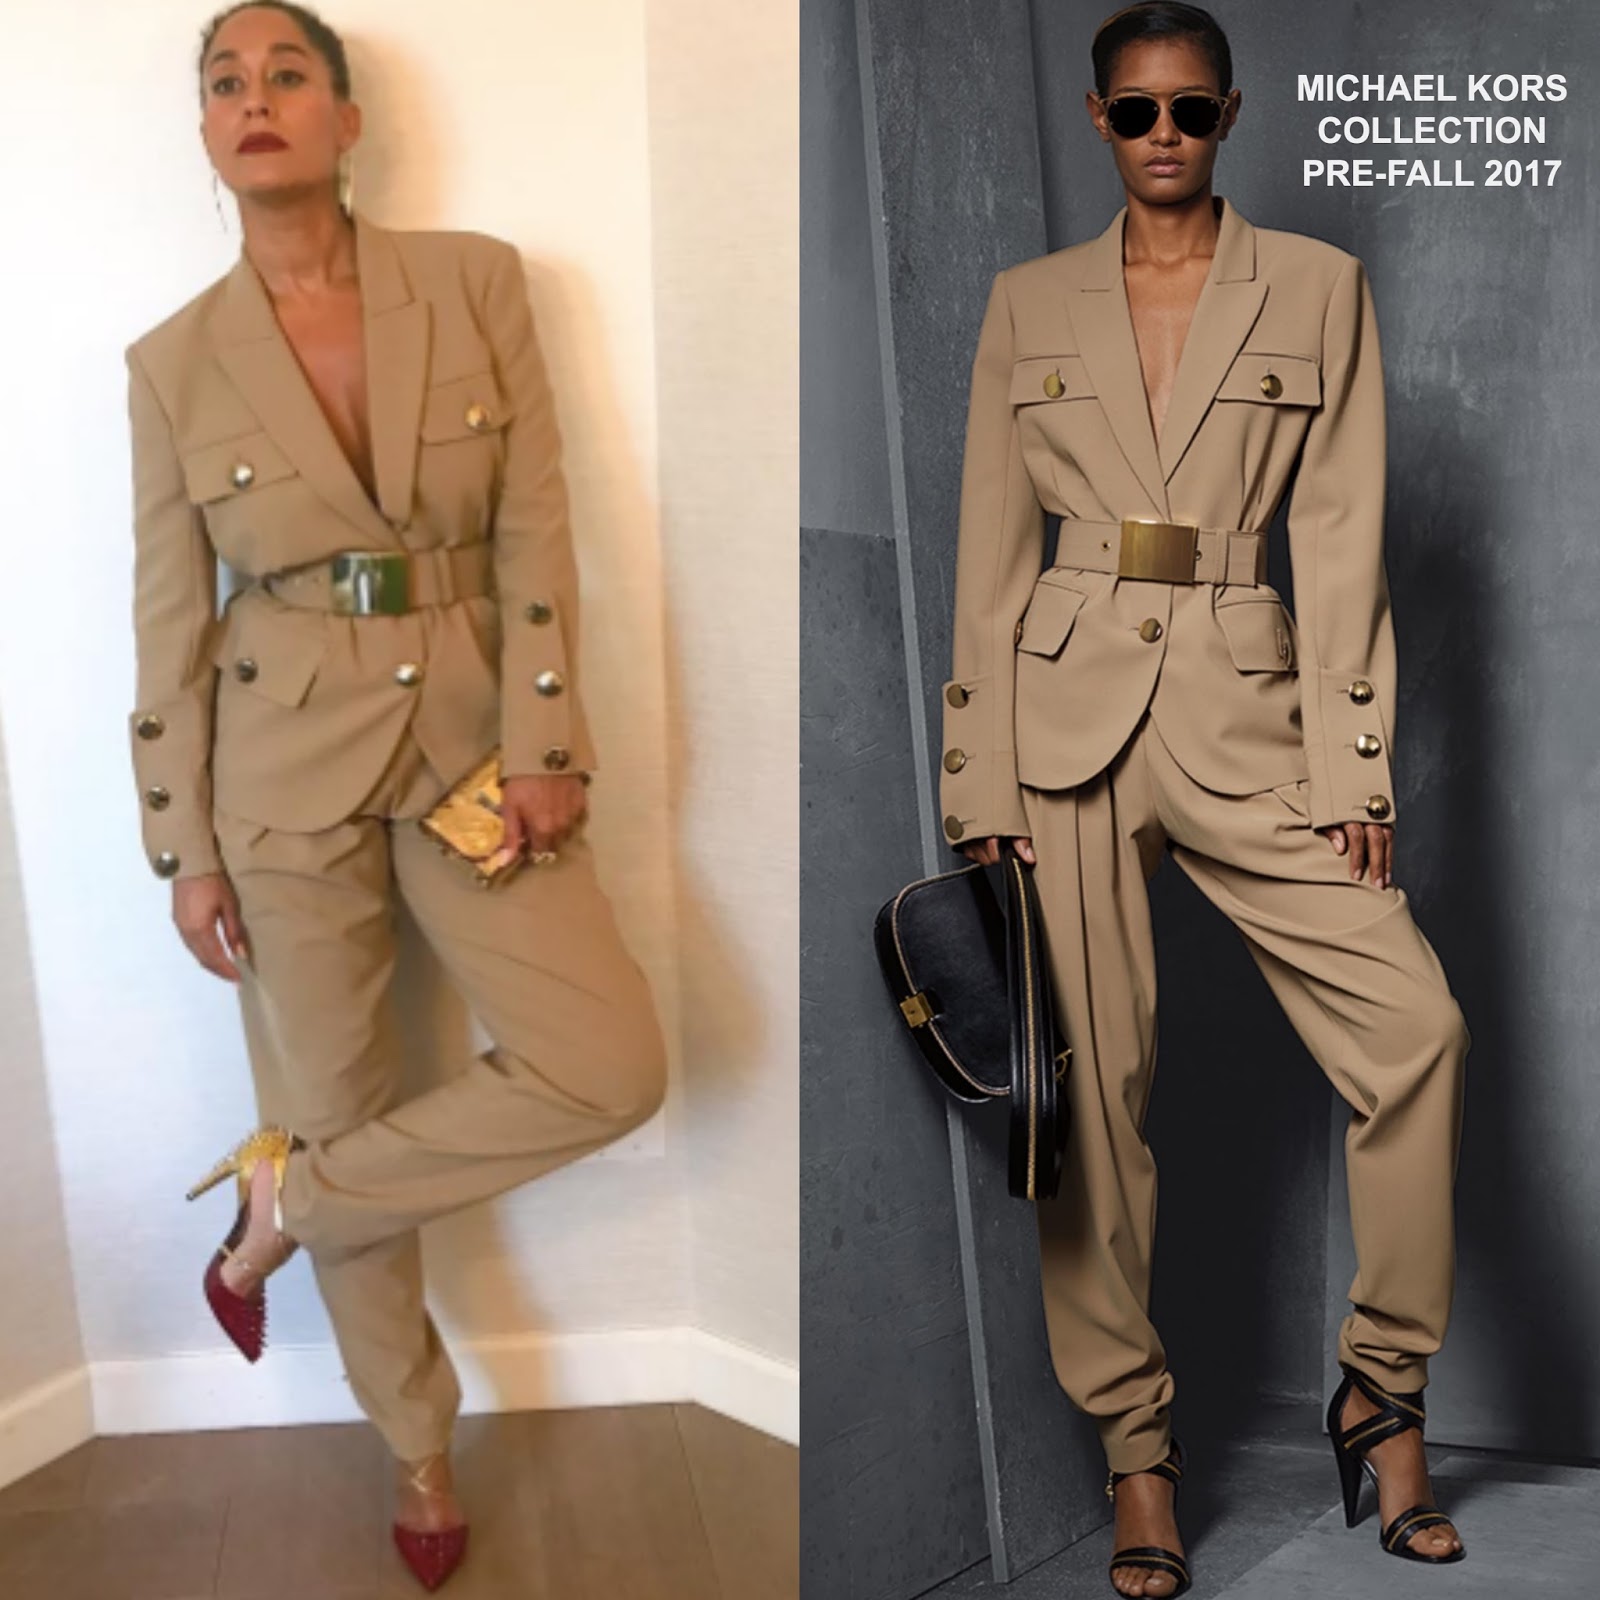 Style: Ellis Ross in Michael Kors Collection